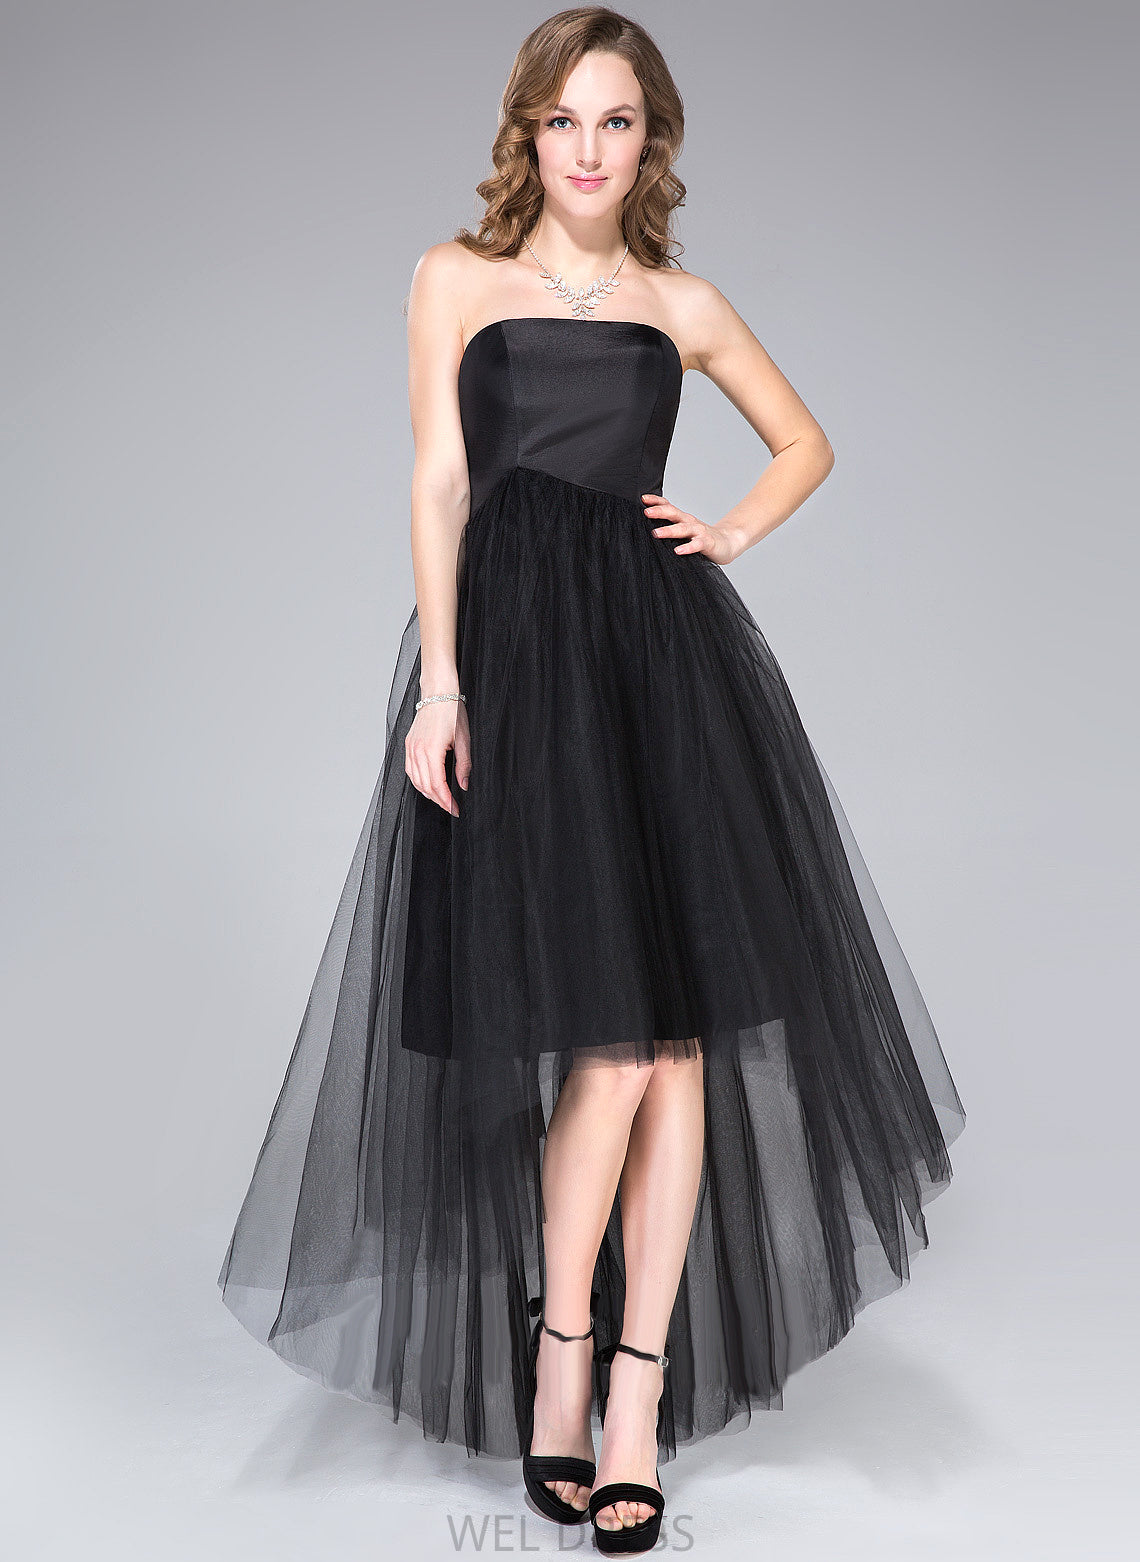 Ruffle With Tulle Strapless Taffeta Homecoming Adrianna A-Line Homecoming Dresses Dress Asymmetrical